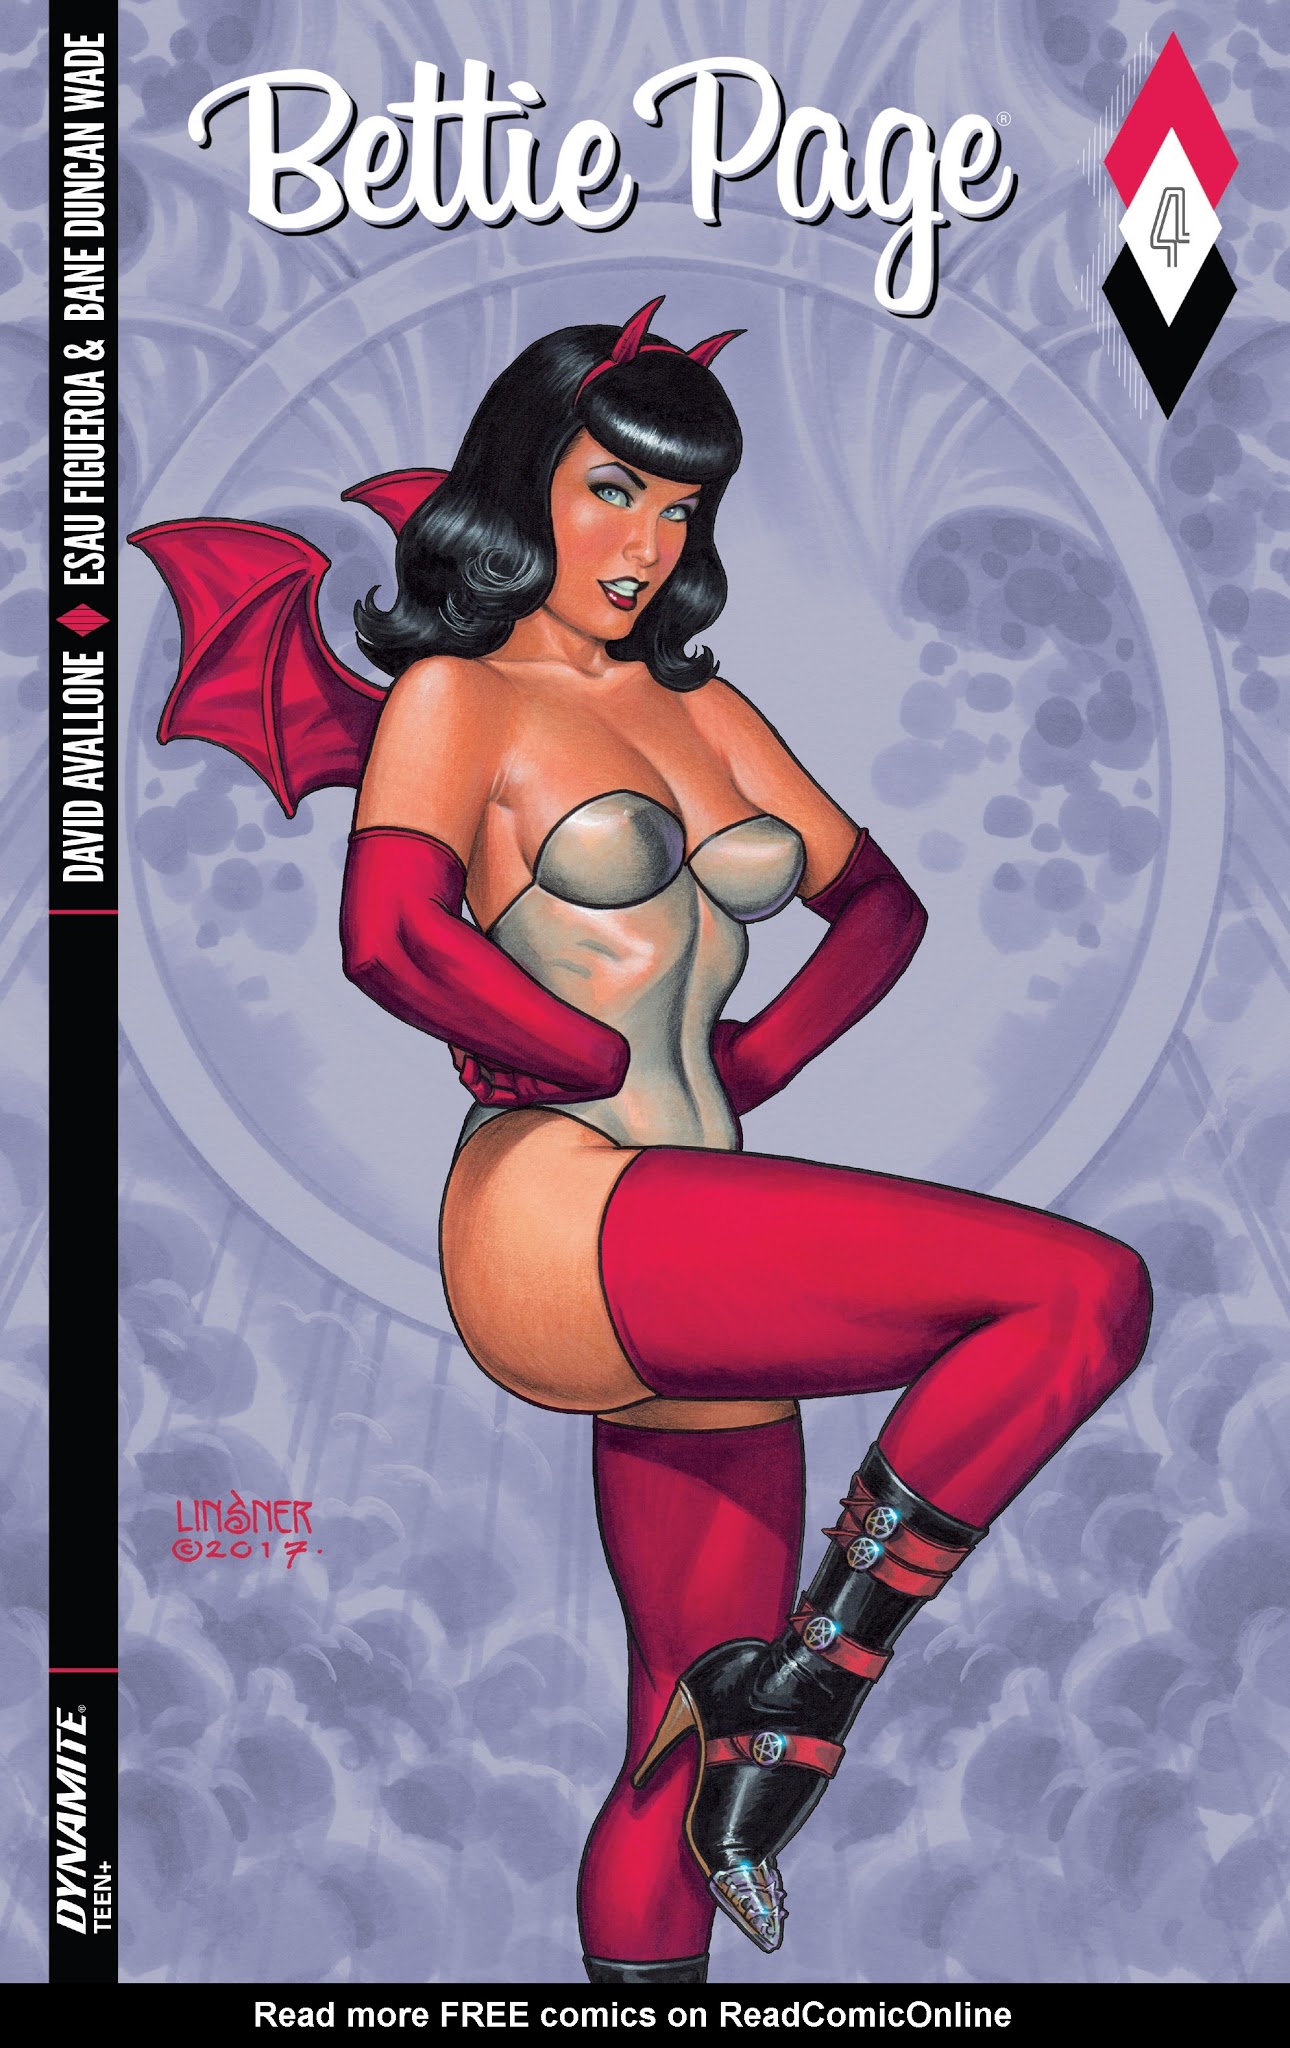 Read online Bettie Page comic -  Issue #4 - 1